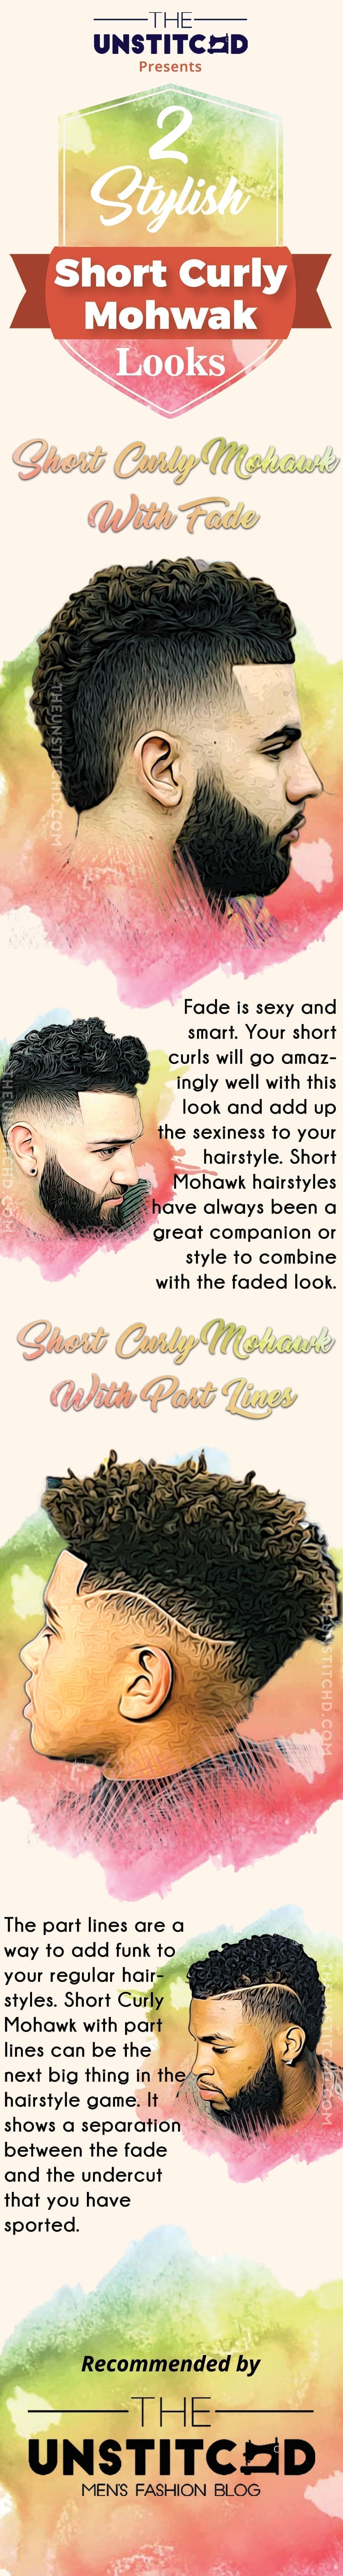 Short-Curly-mohawk-hairstyle-info